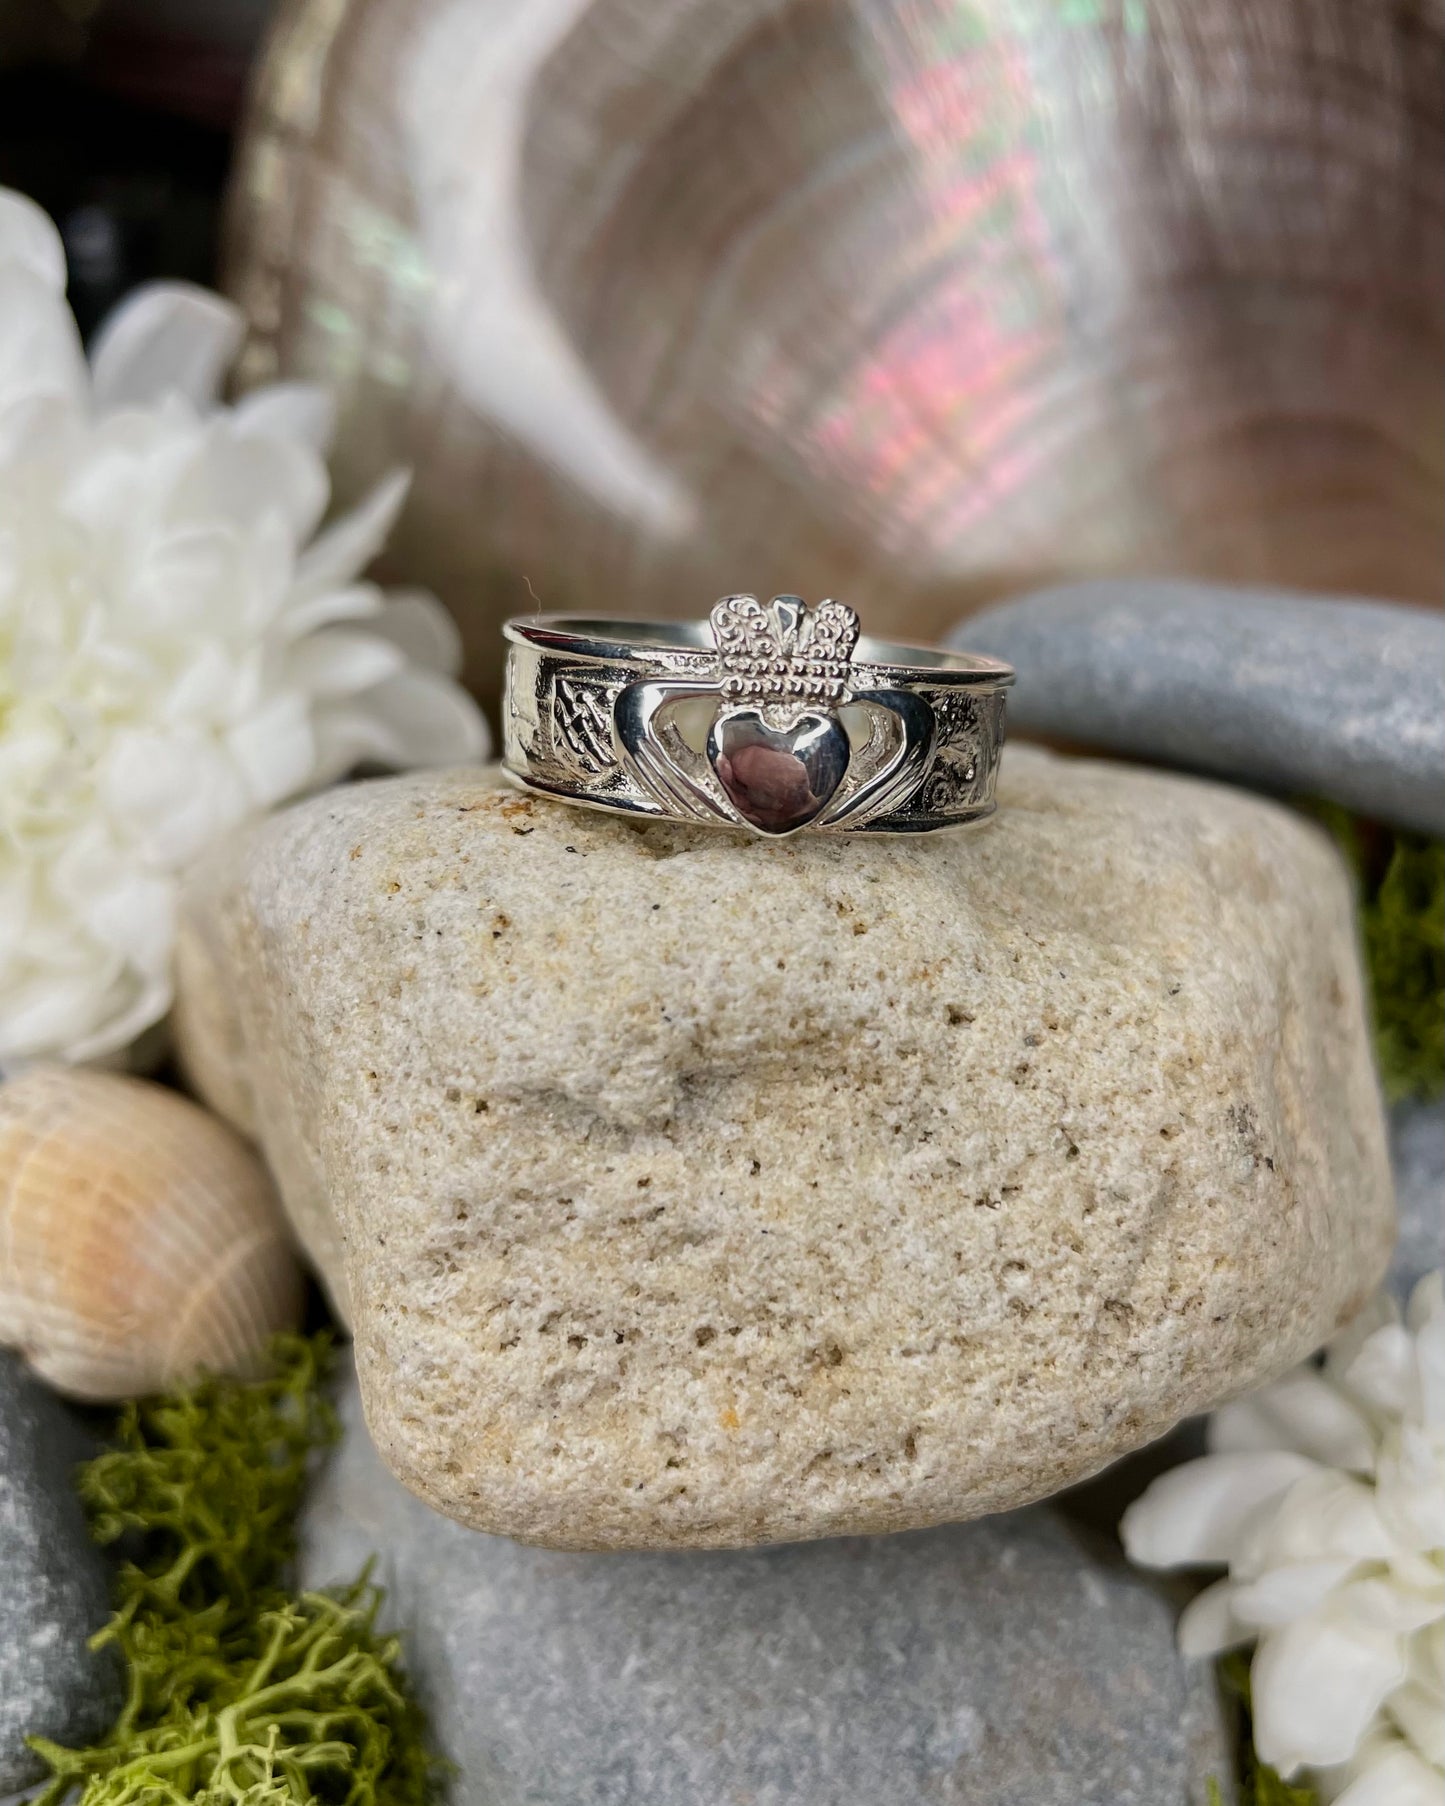 Story of Galway Claddagh Sterling Silver Ring